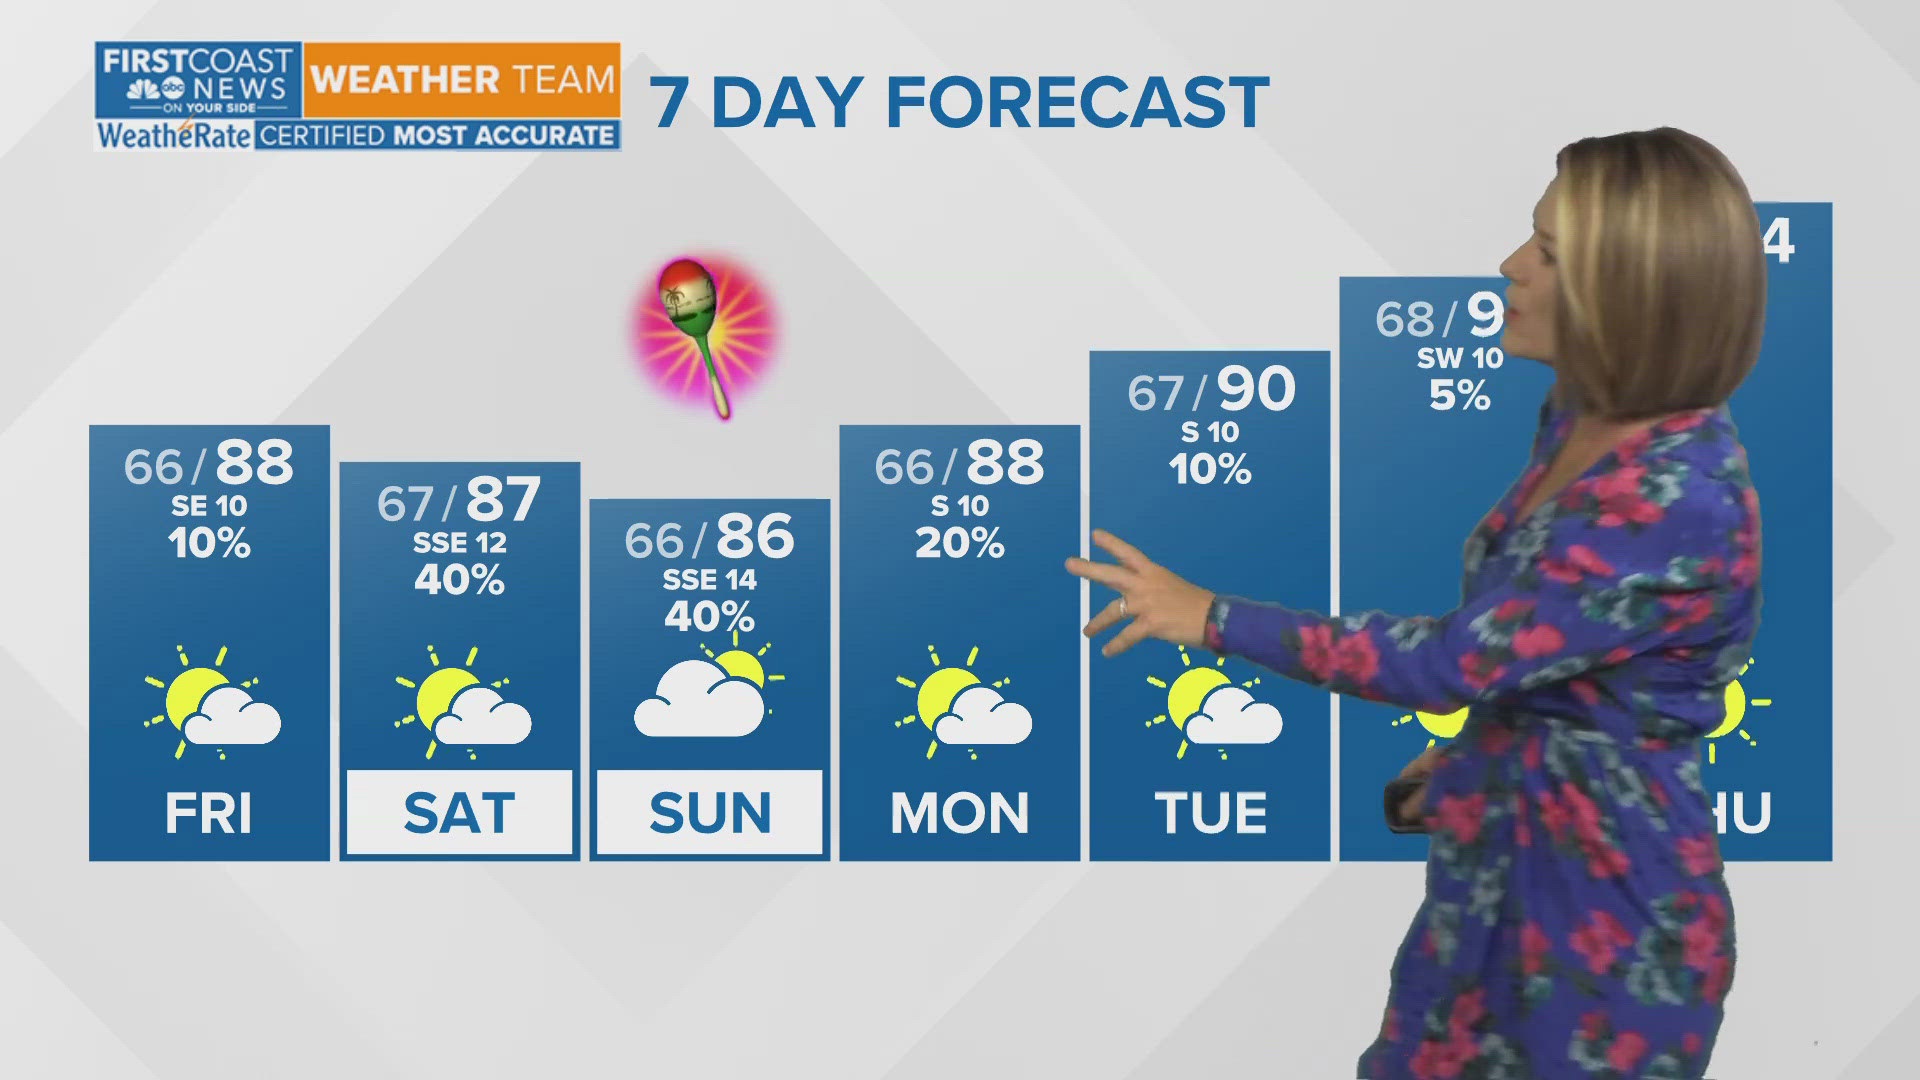 Meteorologist Lauren Rautenkranz says conditions should be mostly dry, but keep your head on a swivel across Jacksonville with the chance for storms to pop up.